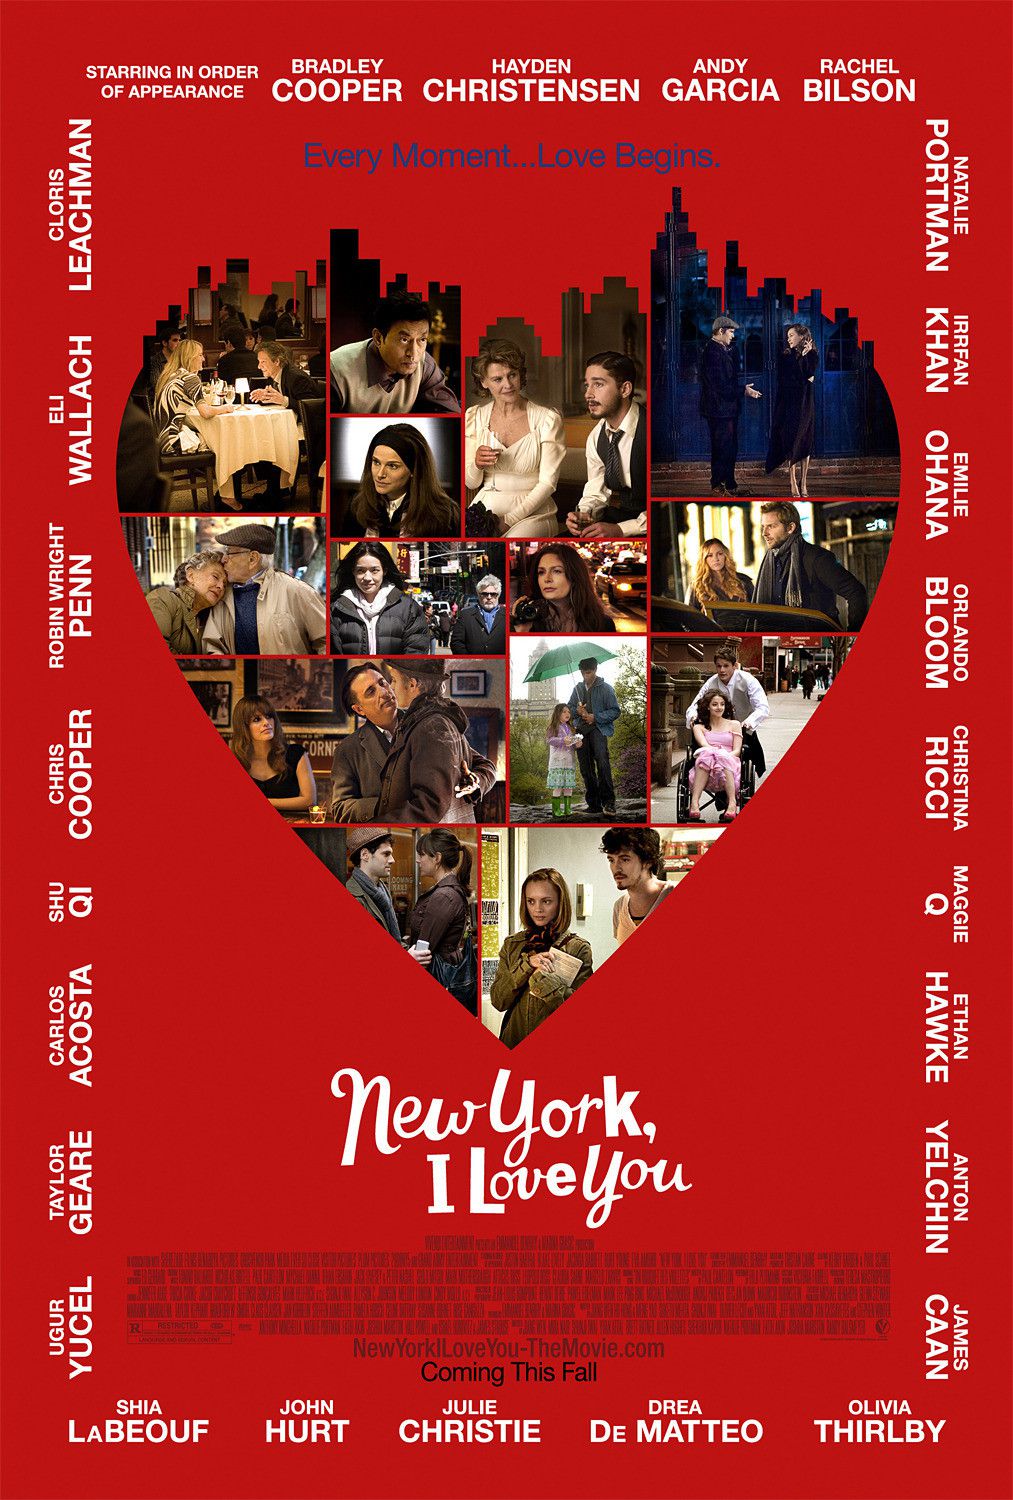 New York, I Love You - Film (2008) streaming VF gratuit complet